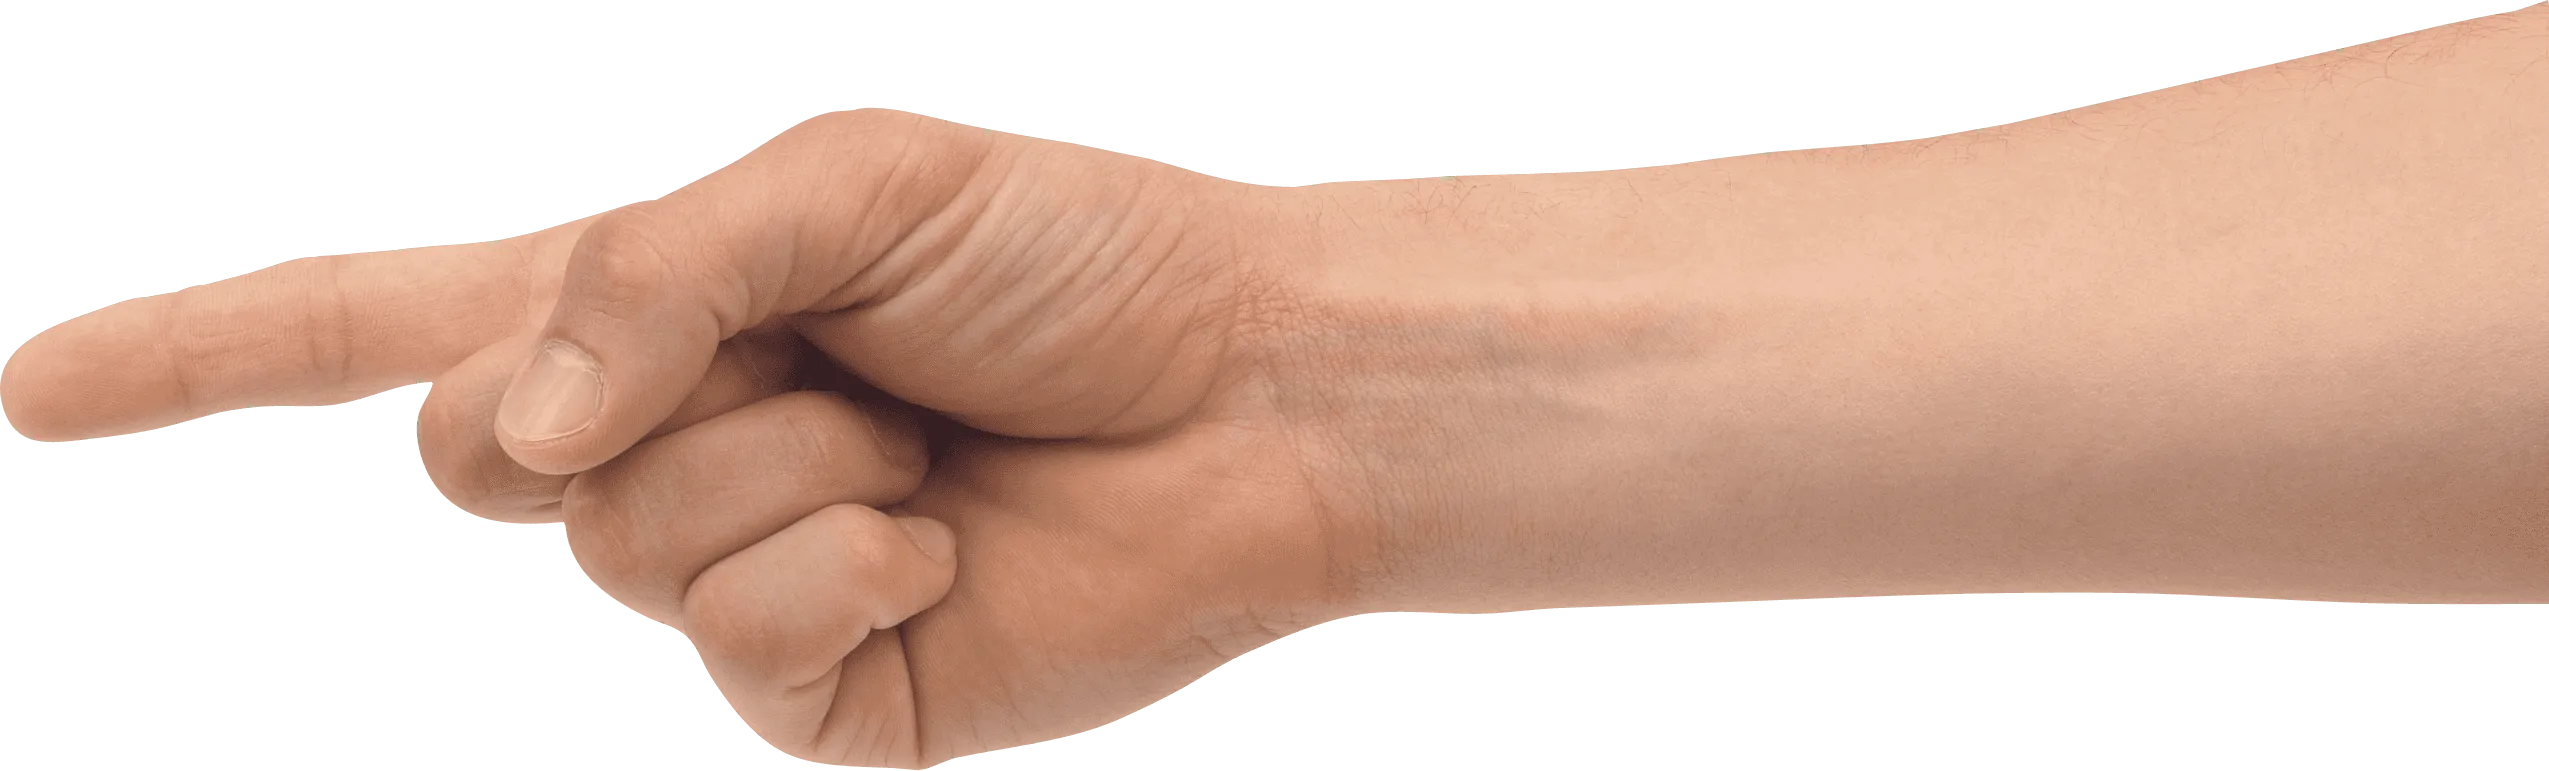 An image of a hand used for animation, where it is correcting misaligned "forever" word.